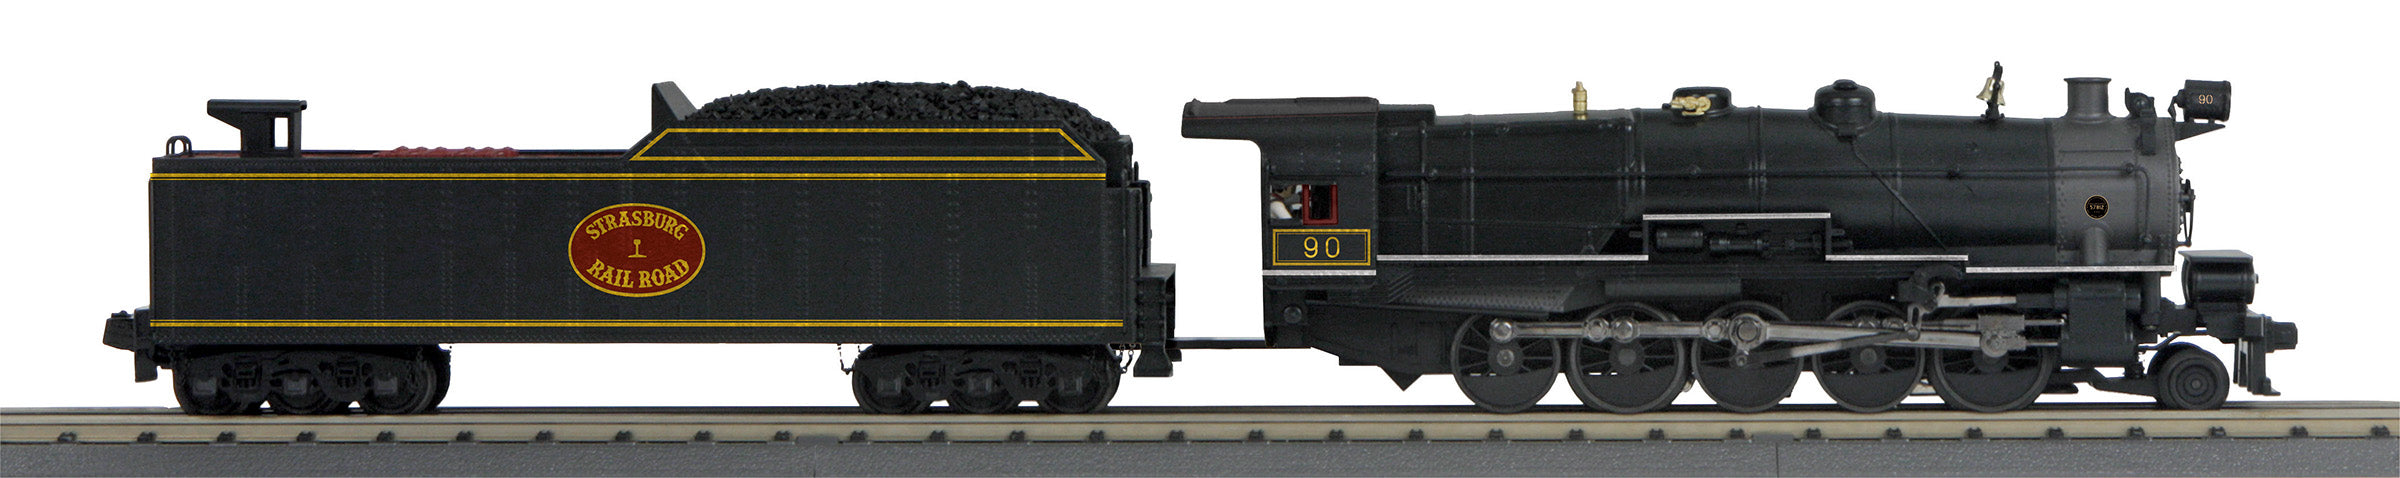 MTH 30-1878-1 - 2-10-0 Imperial Decapod Steam Engine "Strasburg" #90 w/ PS3 (Long Haul Tender)